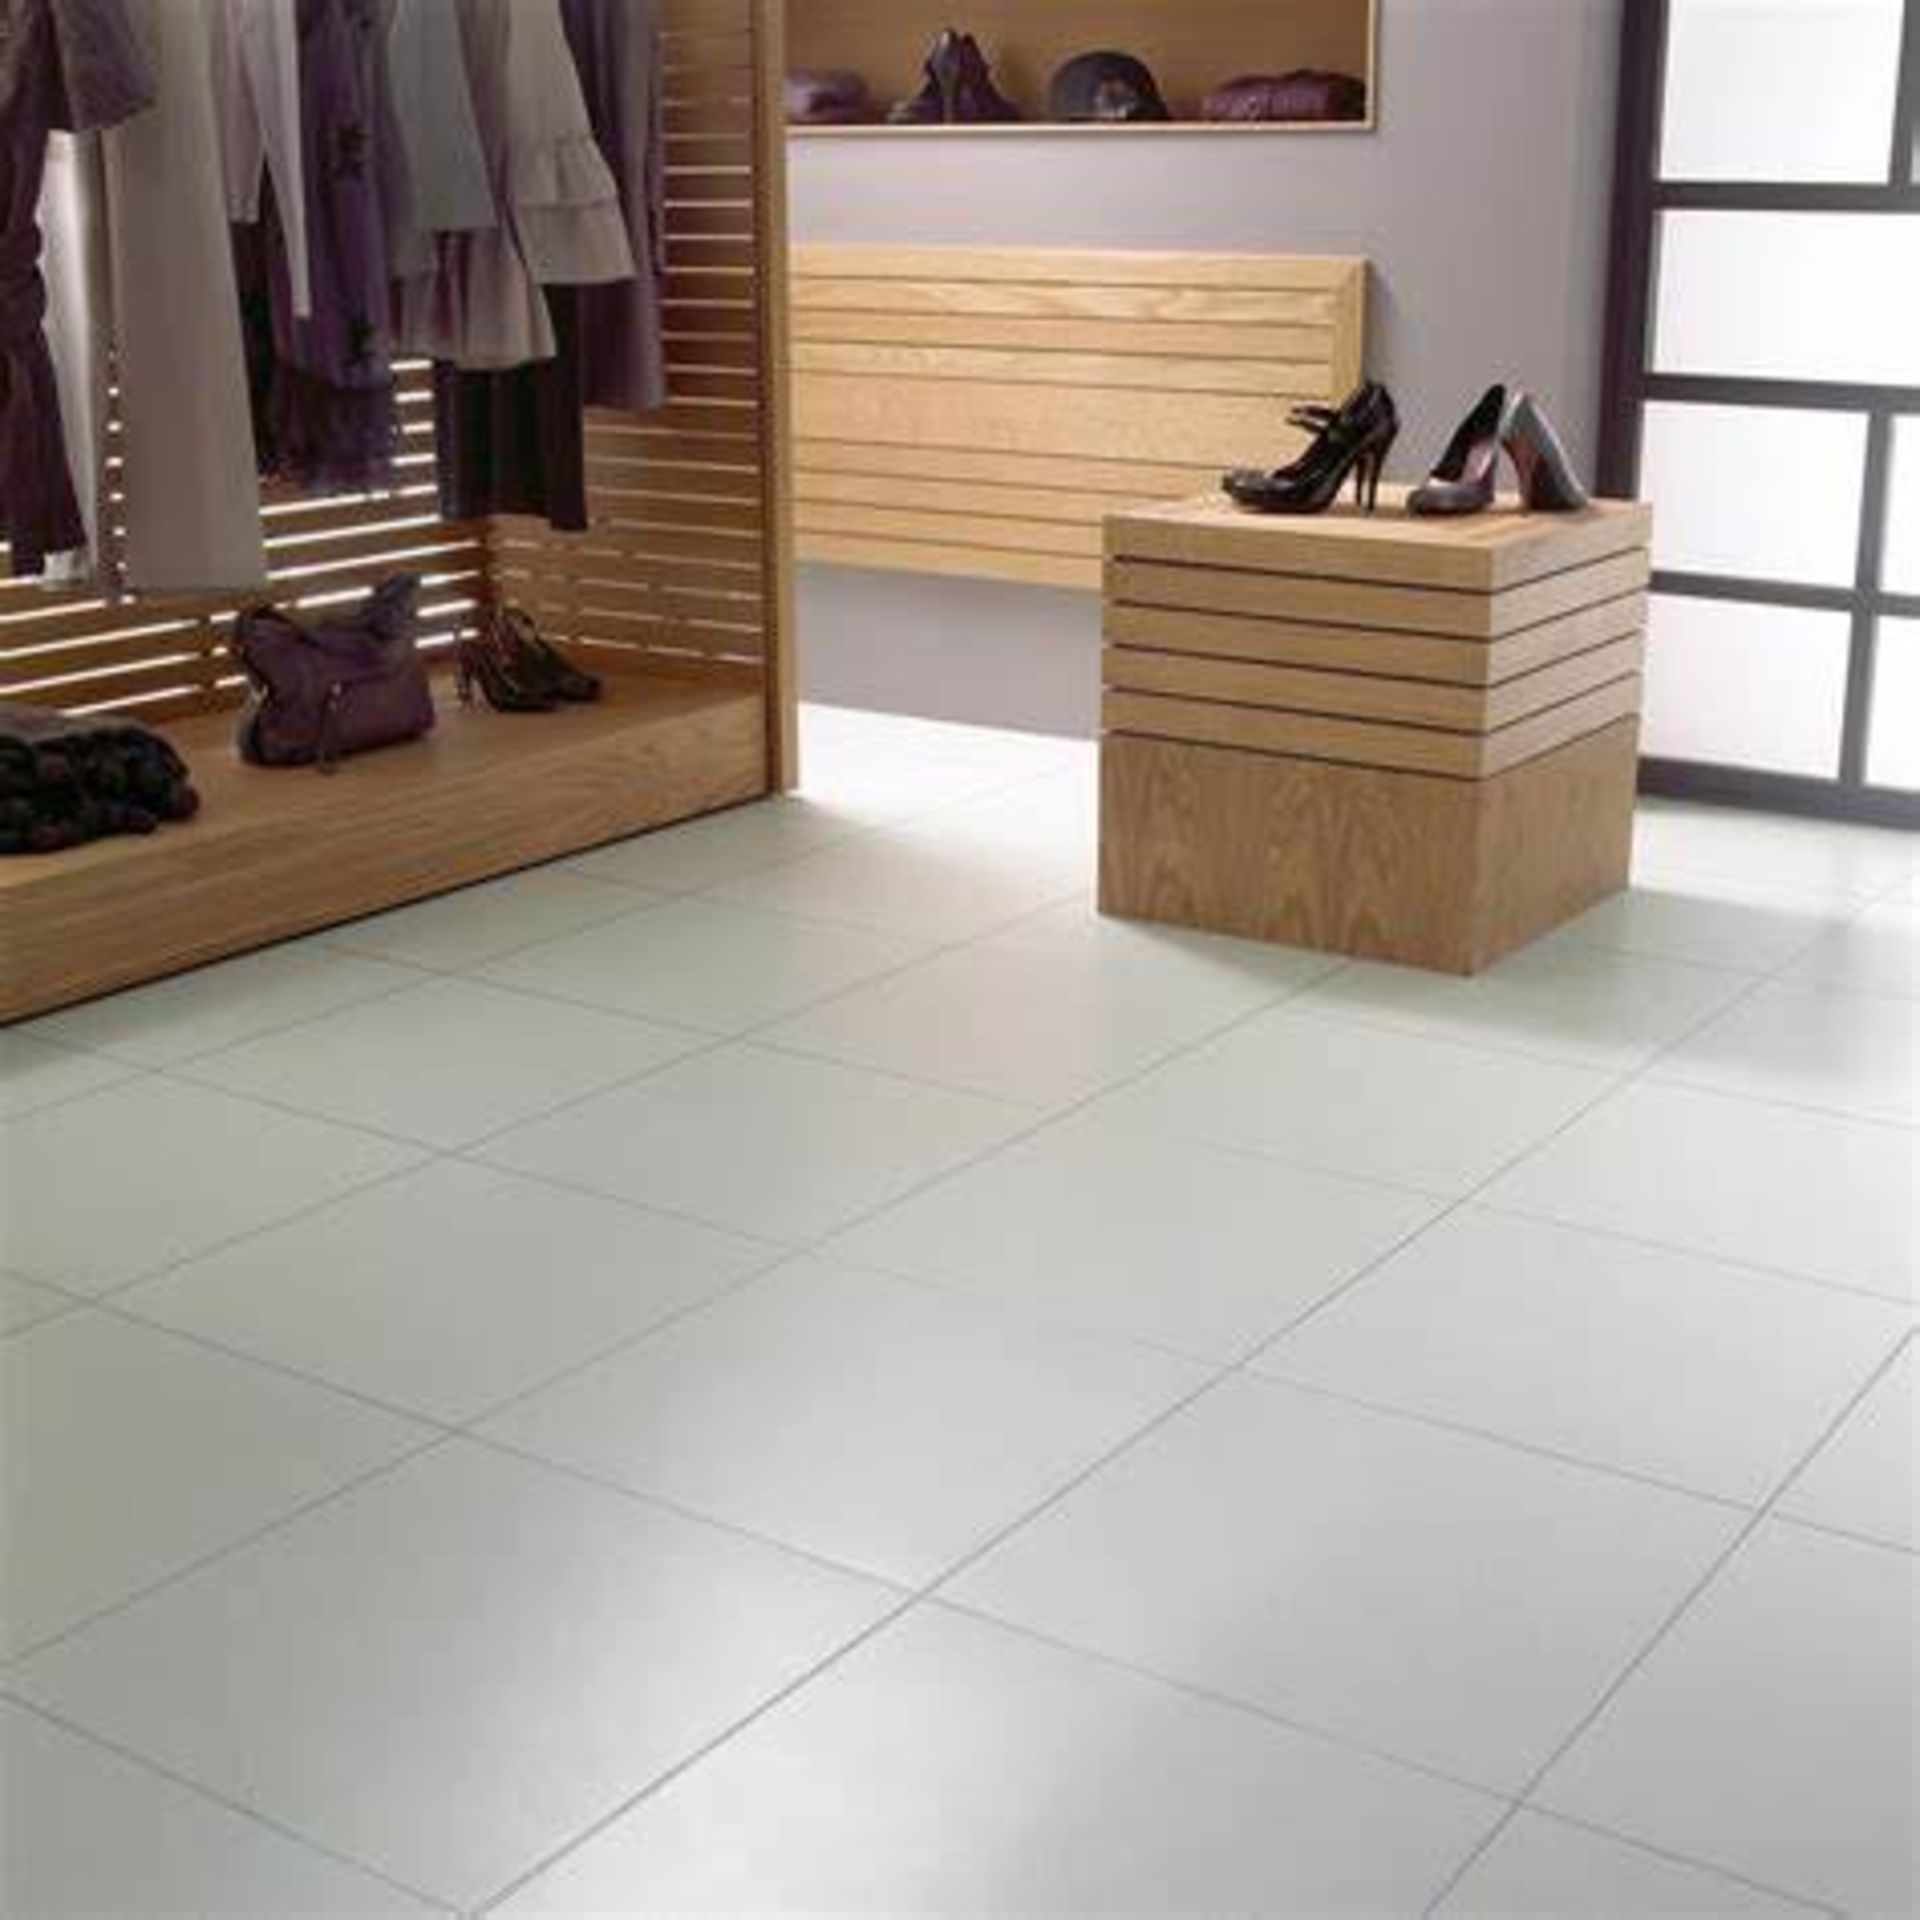 1x Pack of 20 Amtico Signature Composite Calcium AR0SGN11 457x457x2.5mm floor tiles brand new and - Image 2 of 2